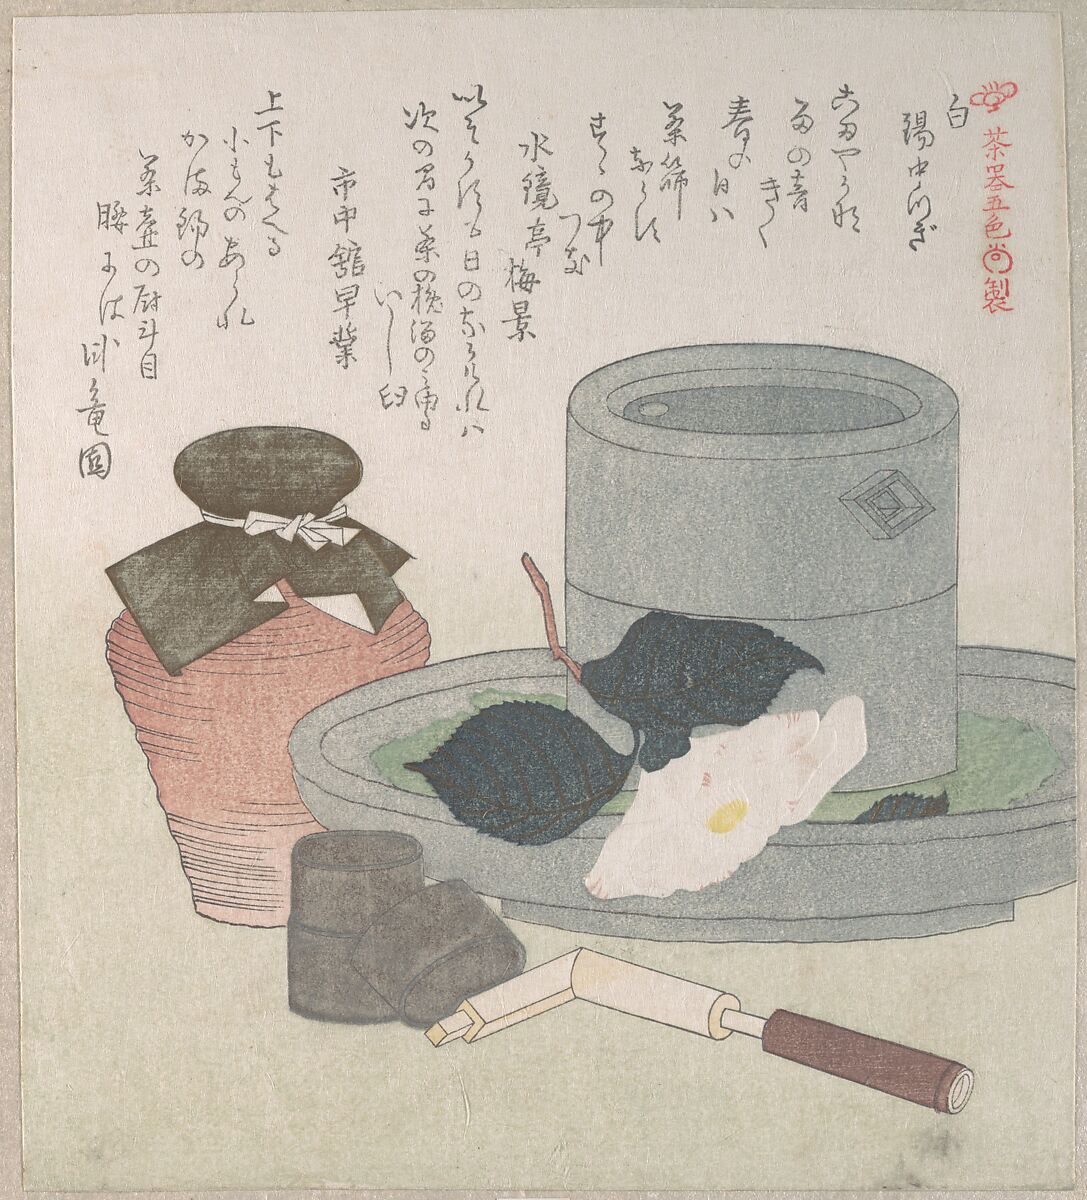 White, Kubo Shunman (Japanese, 1757–1820), Part of an album of woodblock prints (surimono); ink and color on paper, Japan 